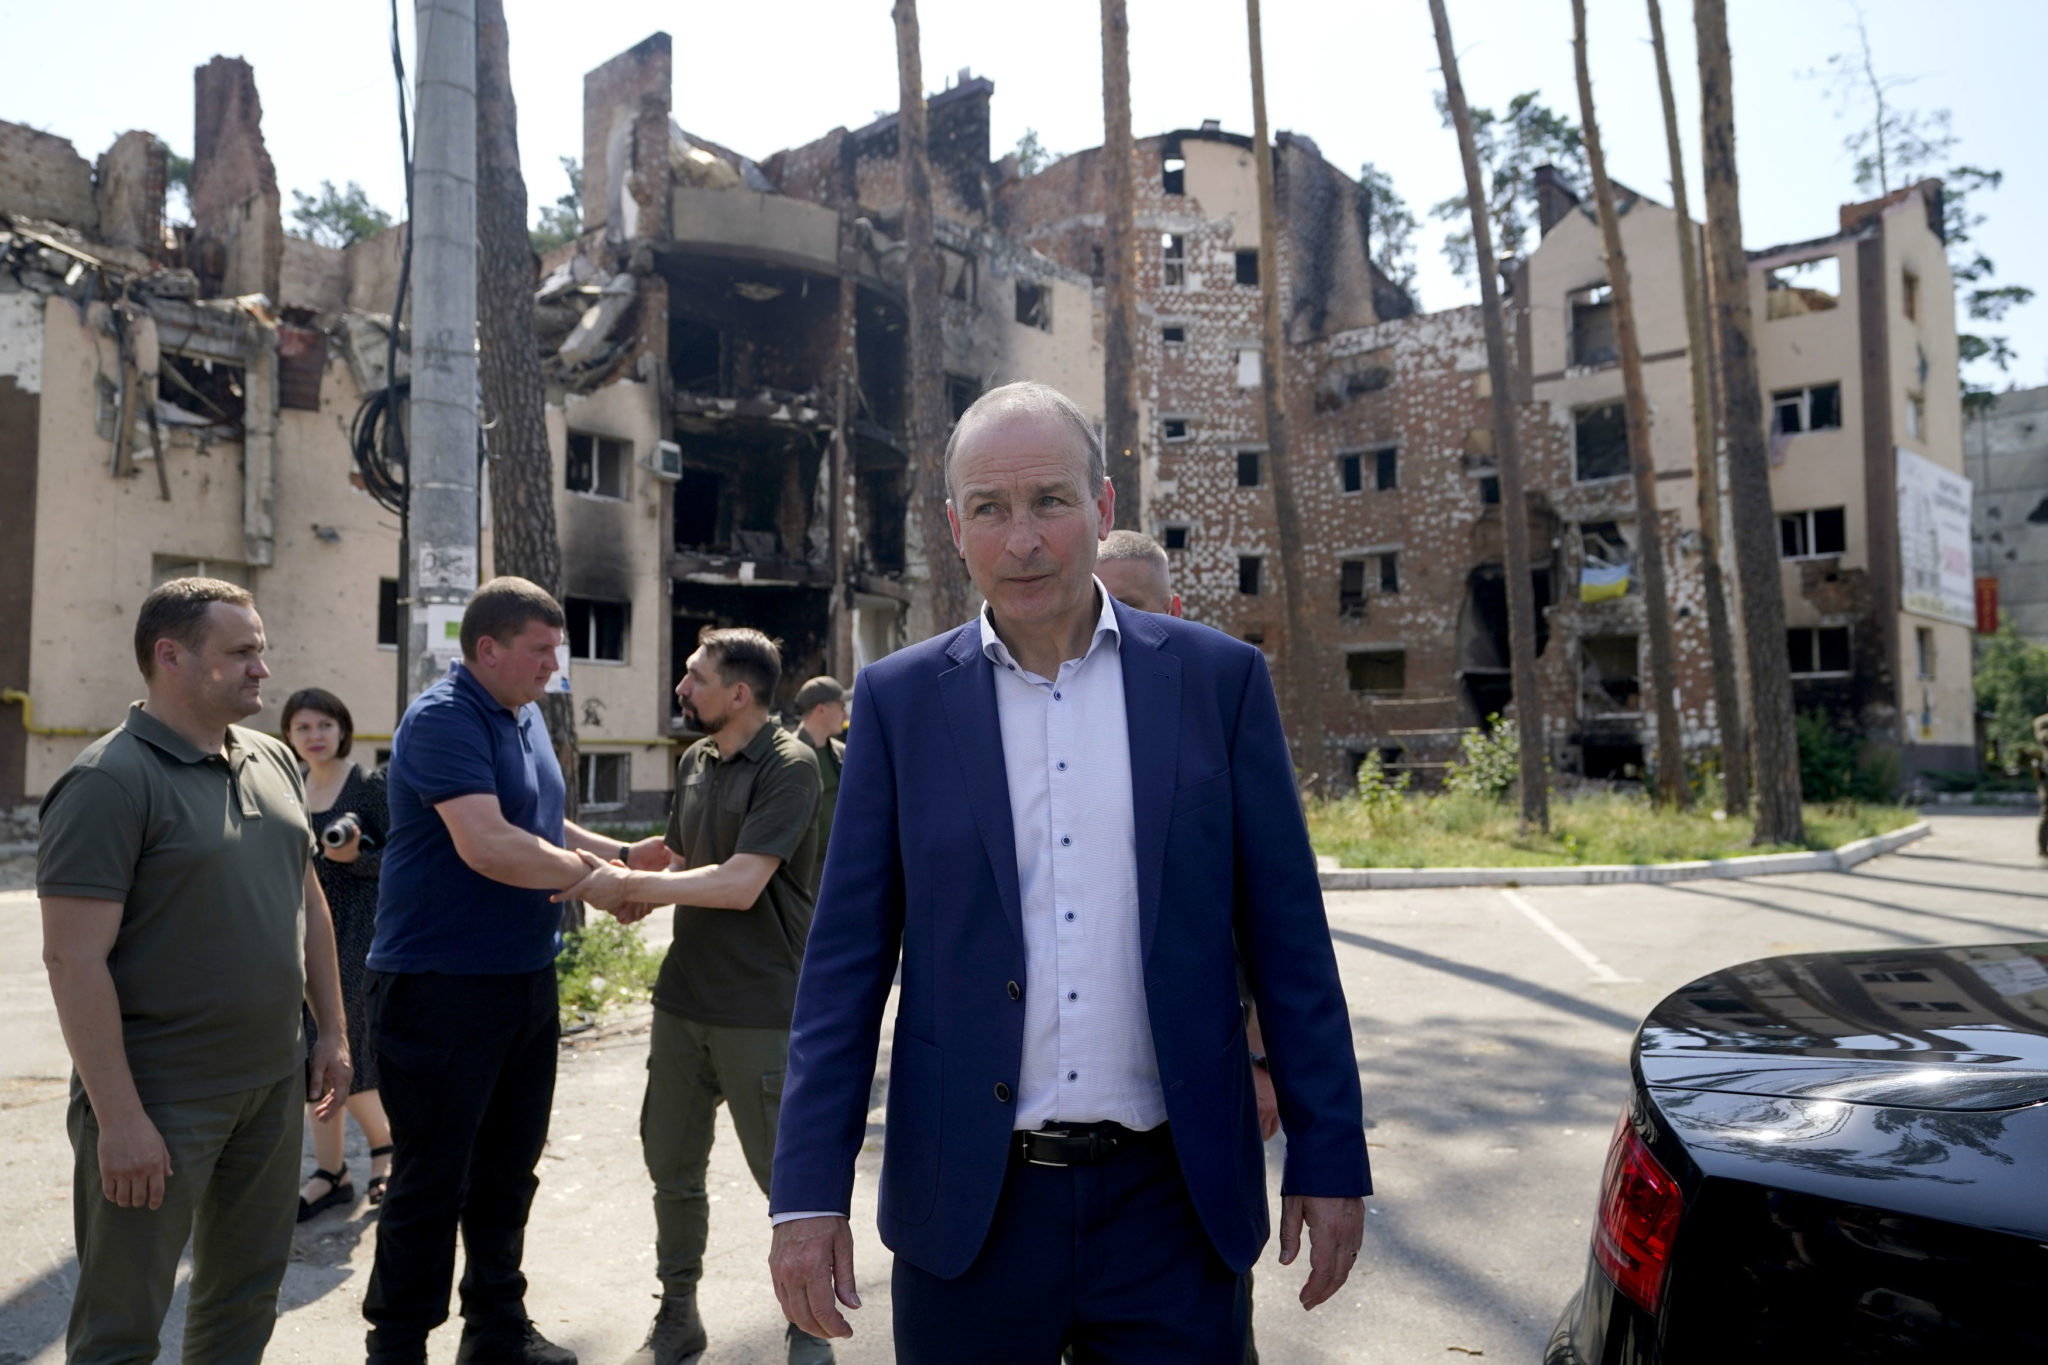 Taoiseach Micheal Martin speaks with local officials whilst viewing the damage to the city of Irpin, Ukraine